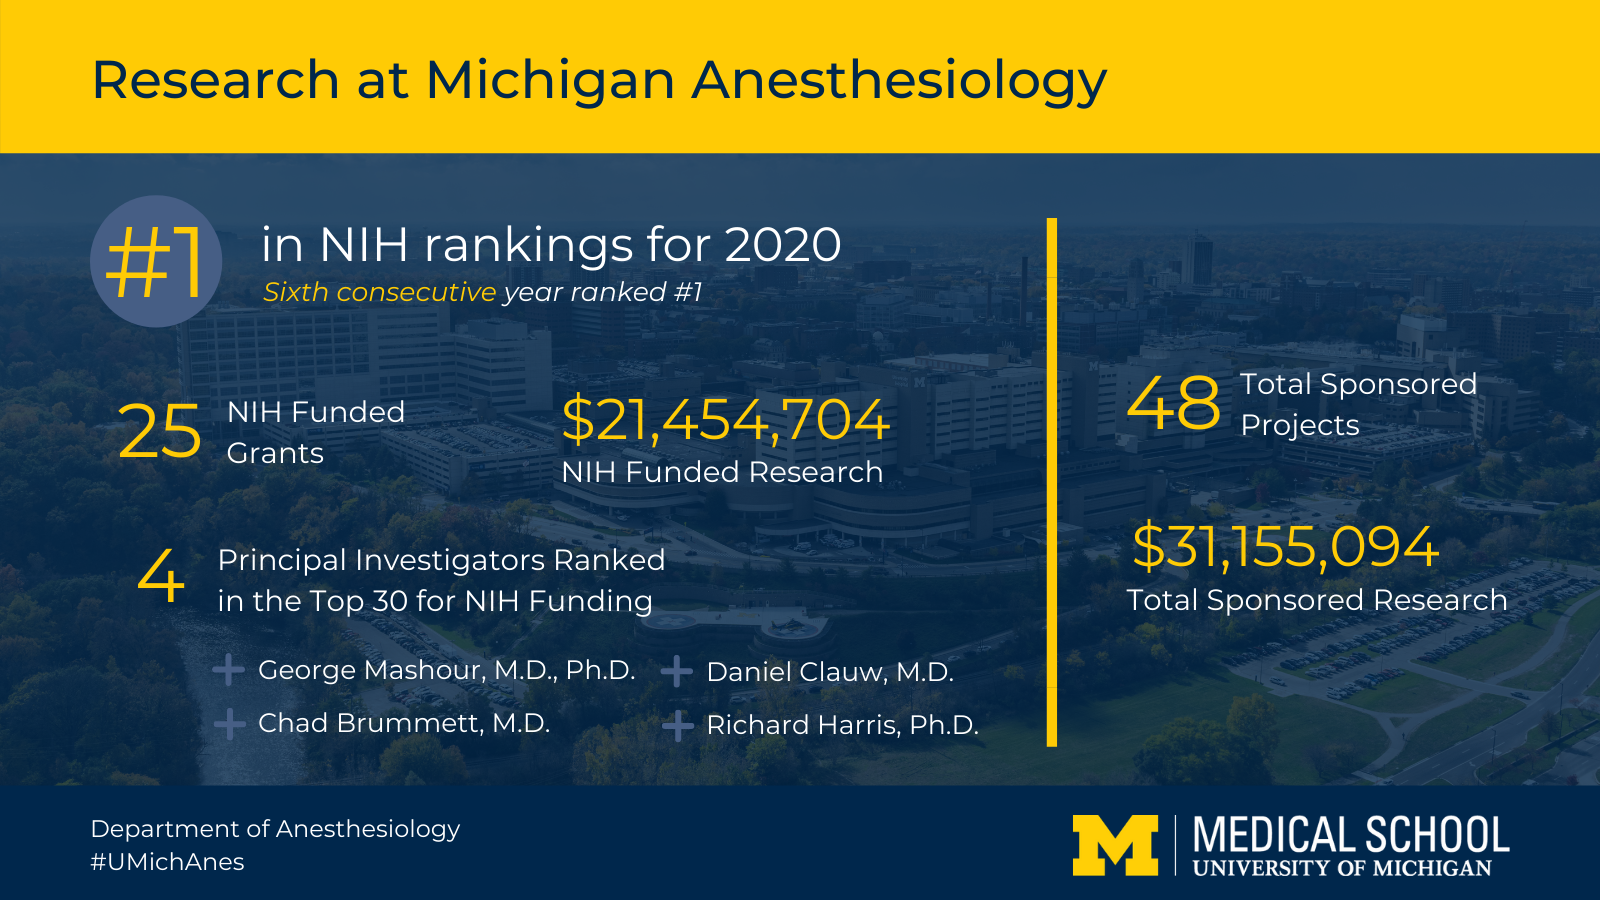 U-M Anesthesiology is ranked #1 in NIH funding with $21.5 million in funding. Overall, the department secured more than $30 million in sponsored projects.